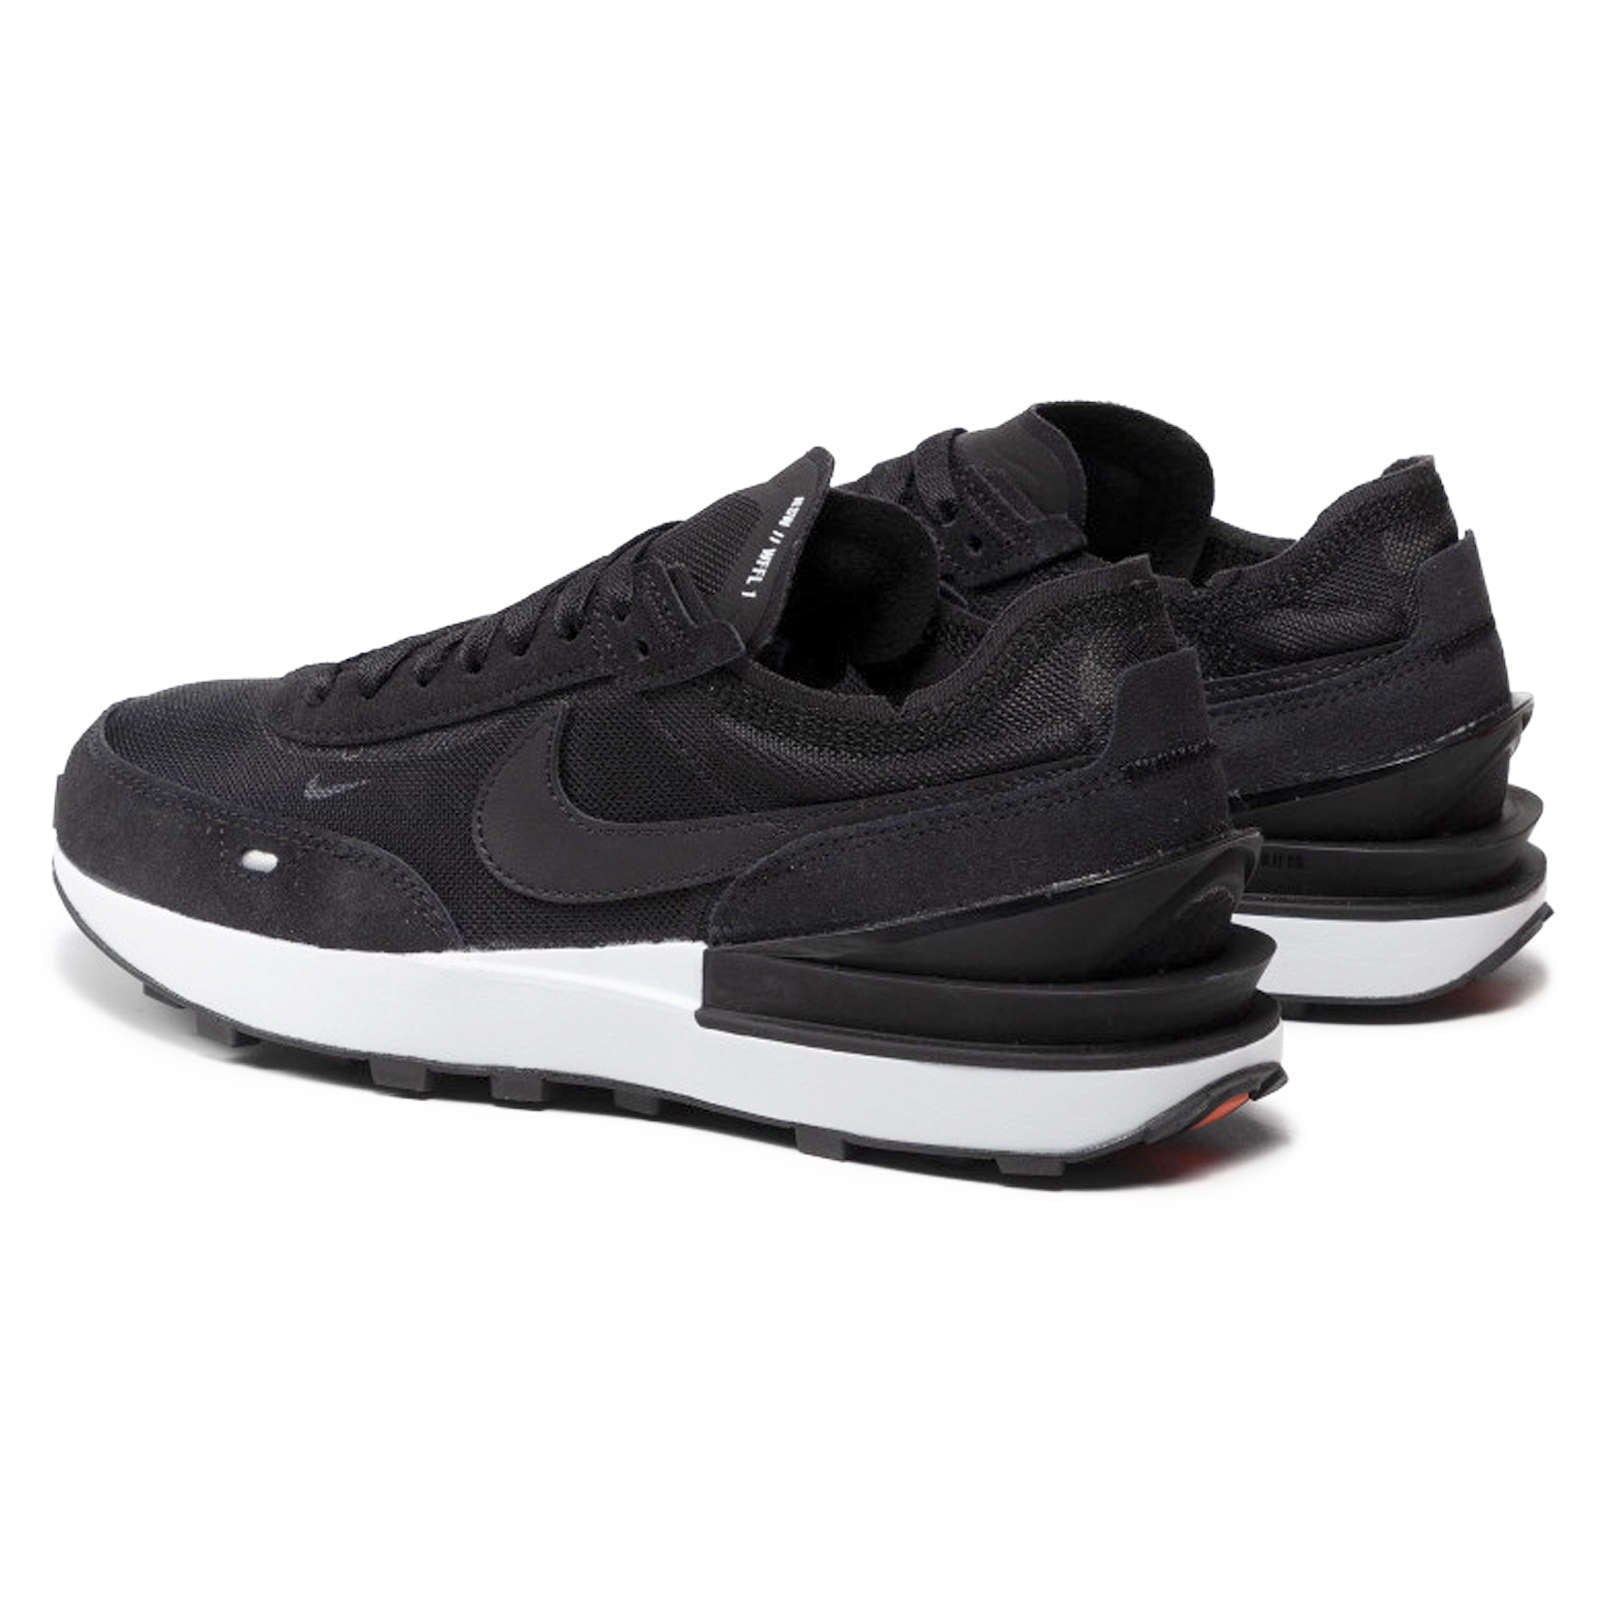 Nike Waffle One Leather Textile Men's Low-Top Trainers#color_black black white orange